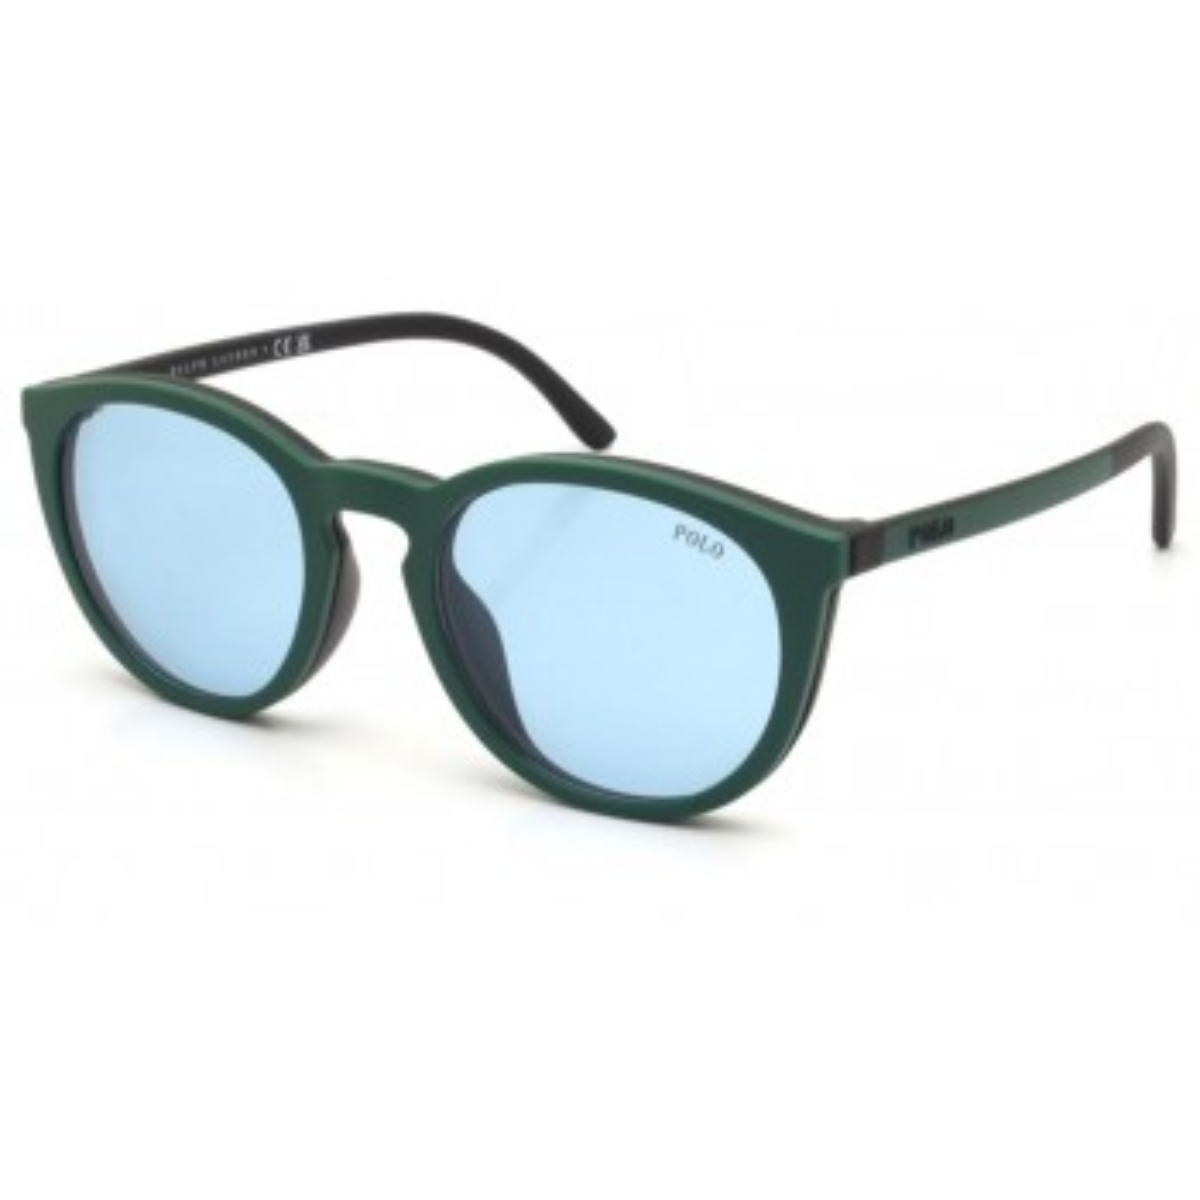 "Discover the trendy Ralph Lauren Polo 4183U Round Shape Sunglasses for Men at Optorium. Non-polarized polycarbonate lenses in blur and mirror grey, paired with a green and black acetate frame. Elevate your style with these fashionable sunglasses."